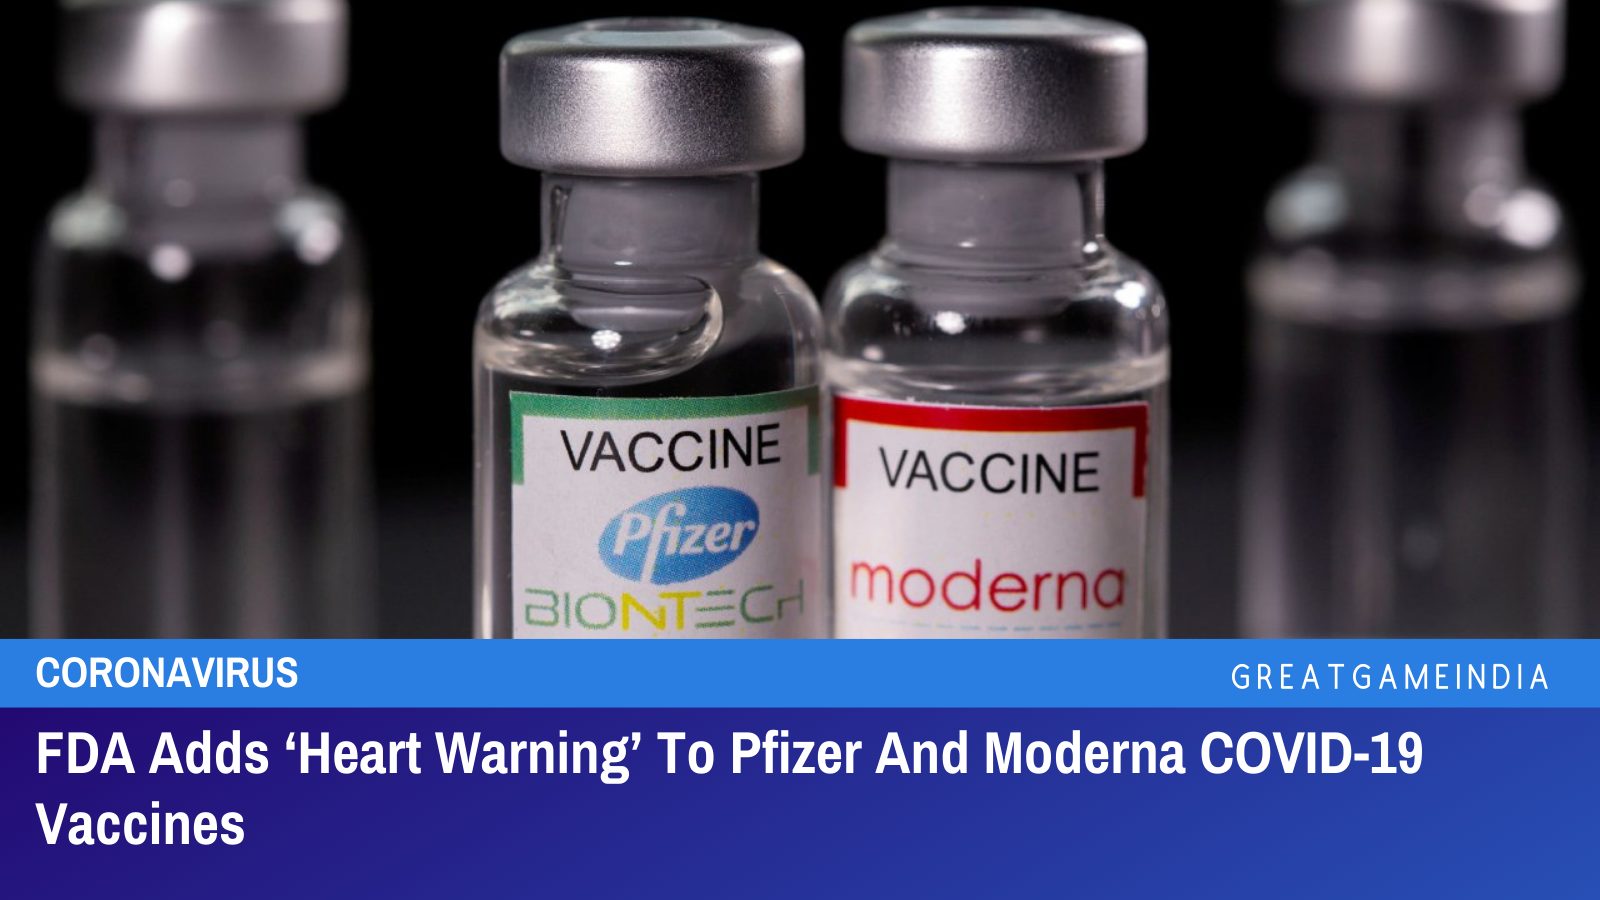 FDA Adds ‘Heart Inflammation Warning’ To Pfizer And Moderna COVID-19 Vaccines